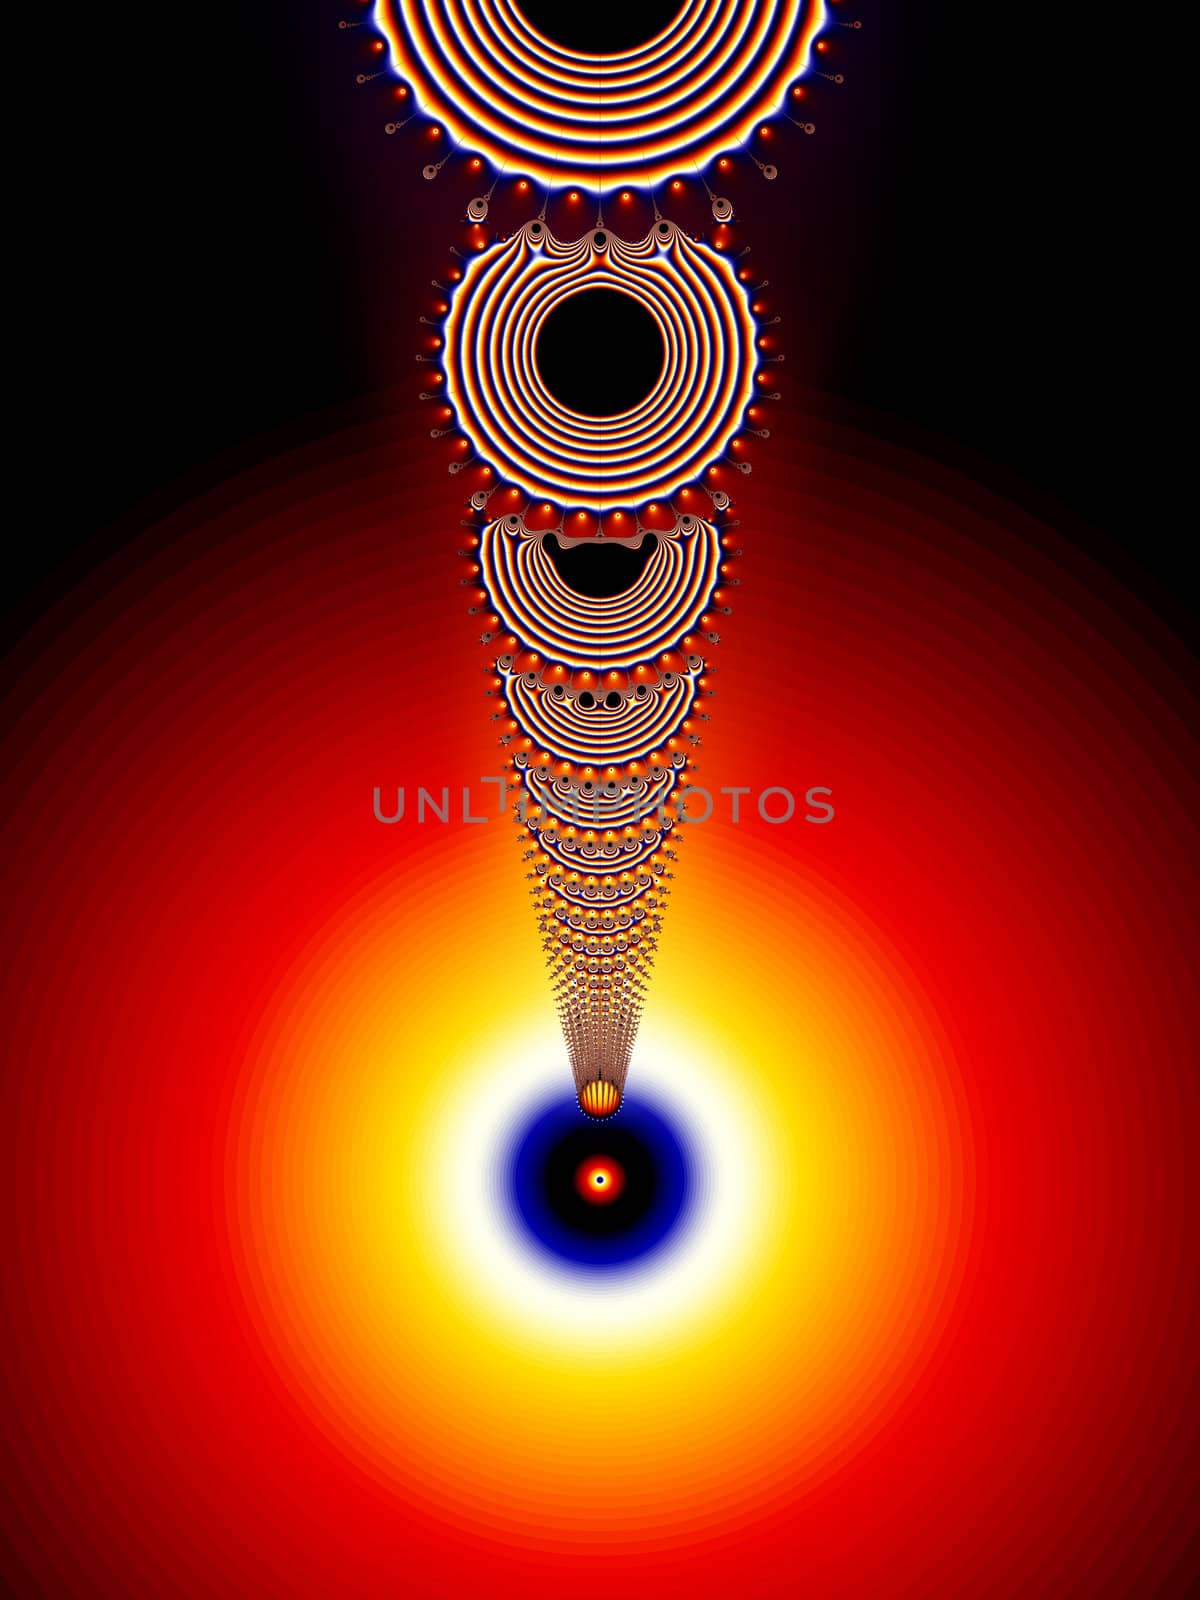 Radio Bullseye Abstract Fractal represents the signals of a radio or radio tower centered on a bullseye below. It also appears to be a ball dropping through rings towards its mark on the bullseye.
